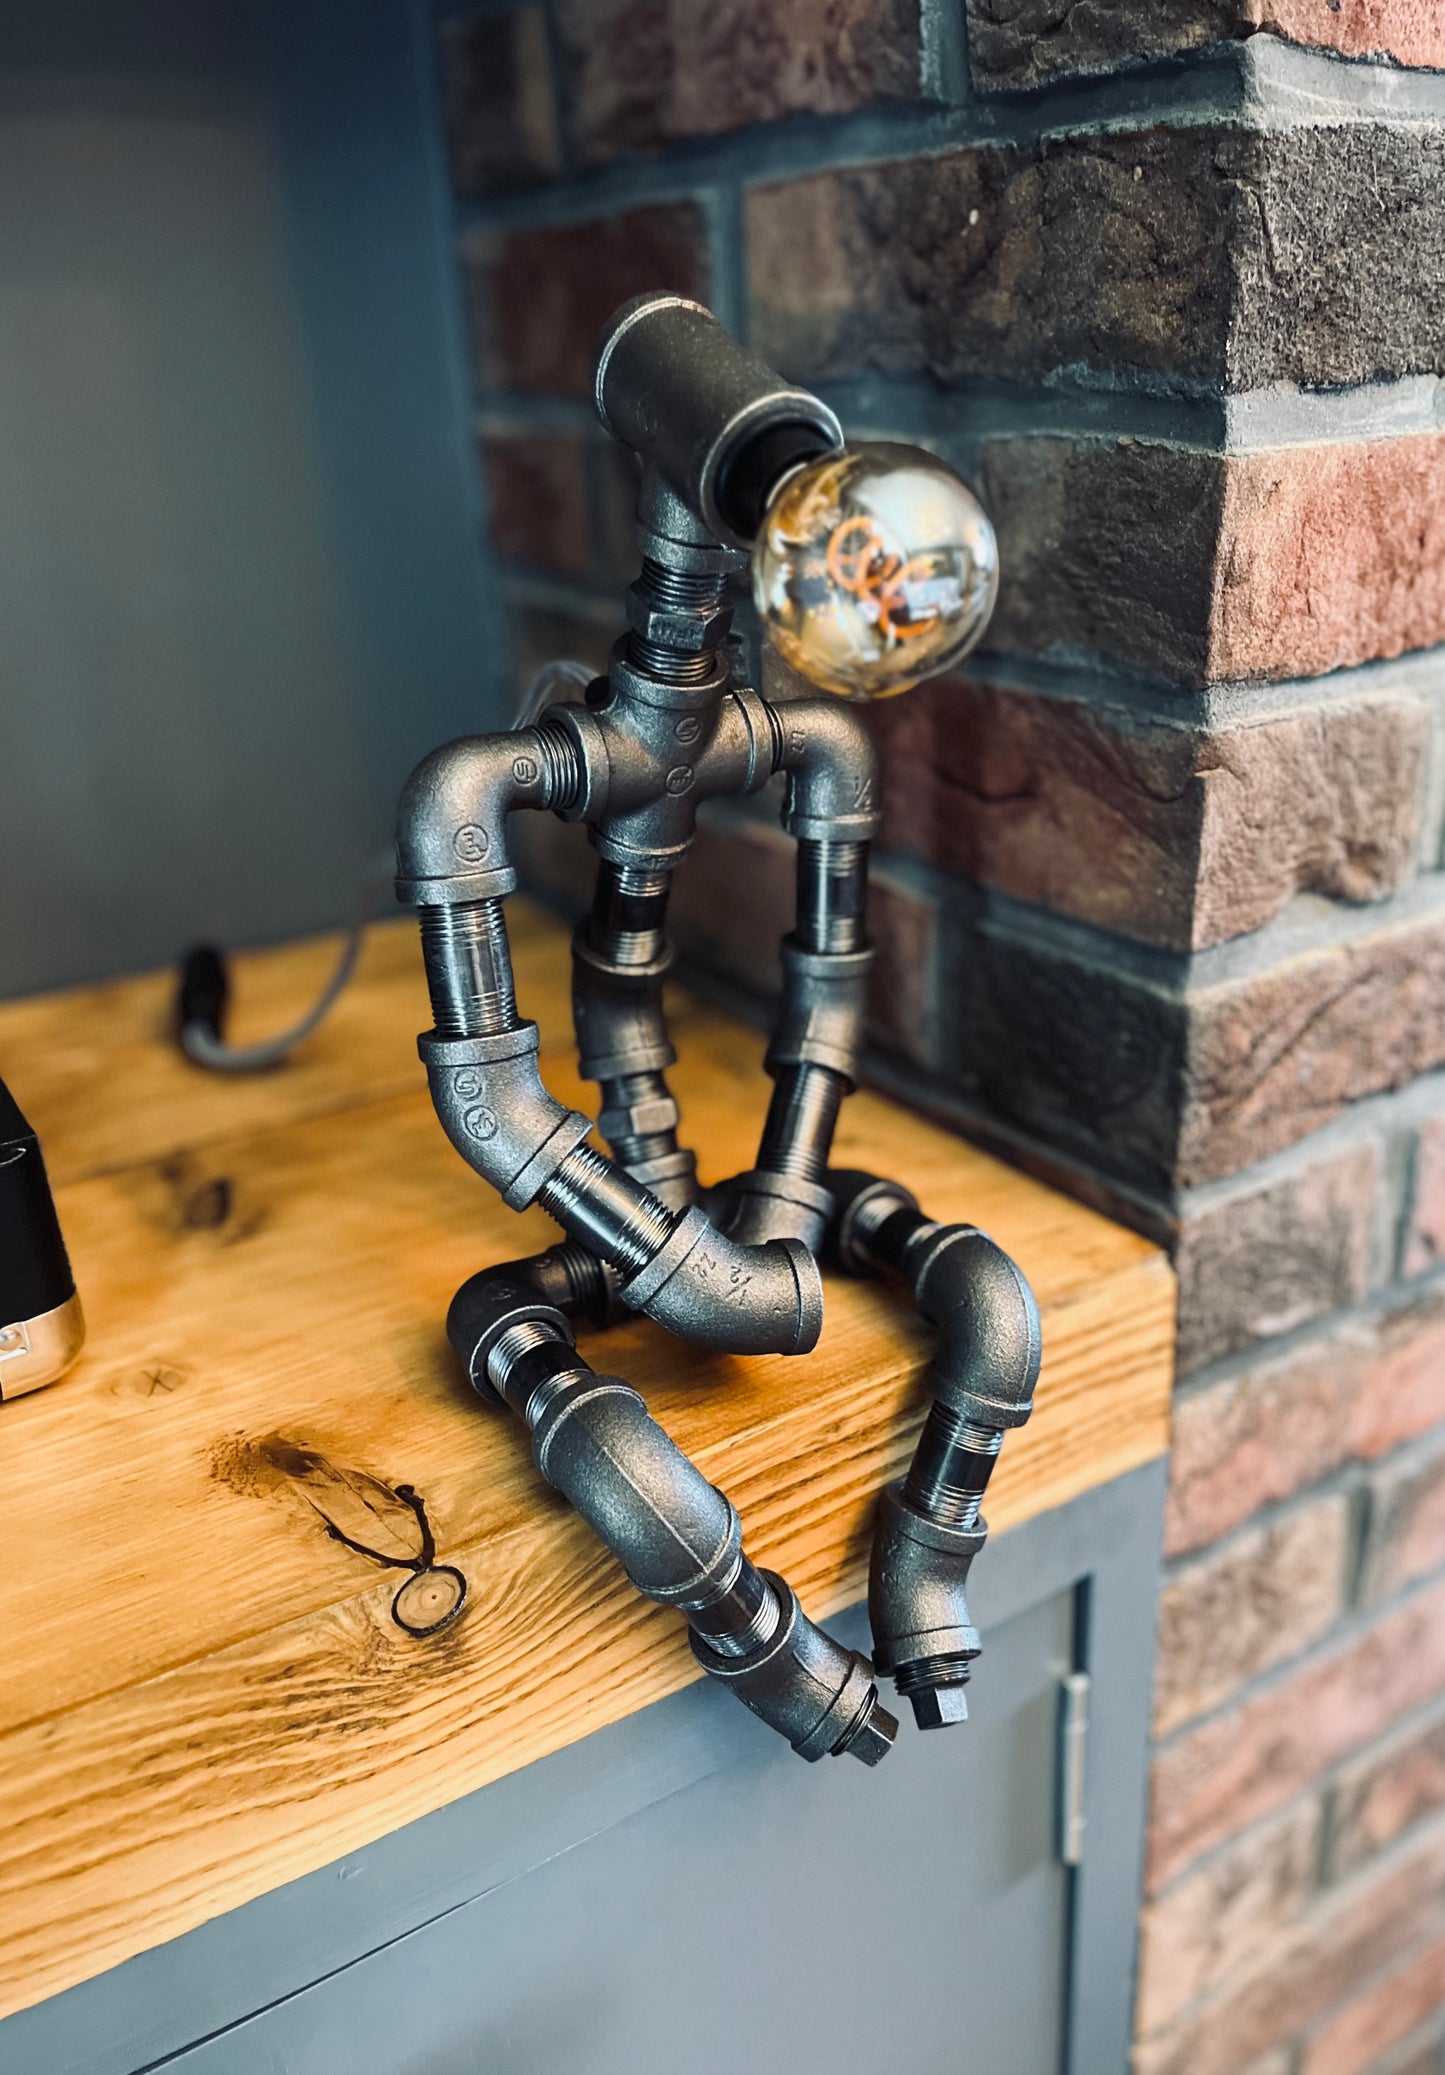 The Pensive Man Industrial Iron Pipe Man Robot Lamp & Vintage Bulb